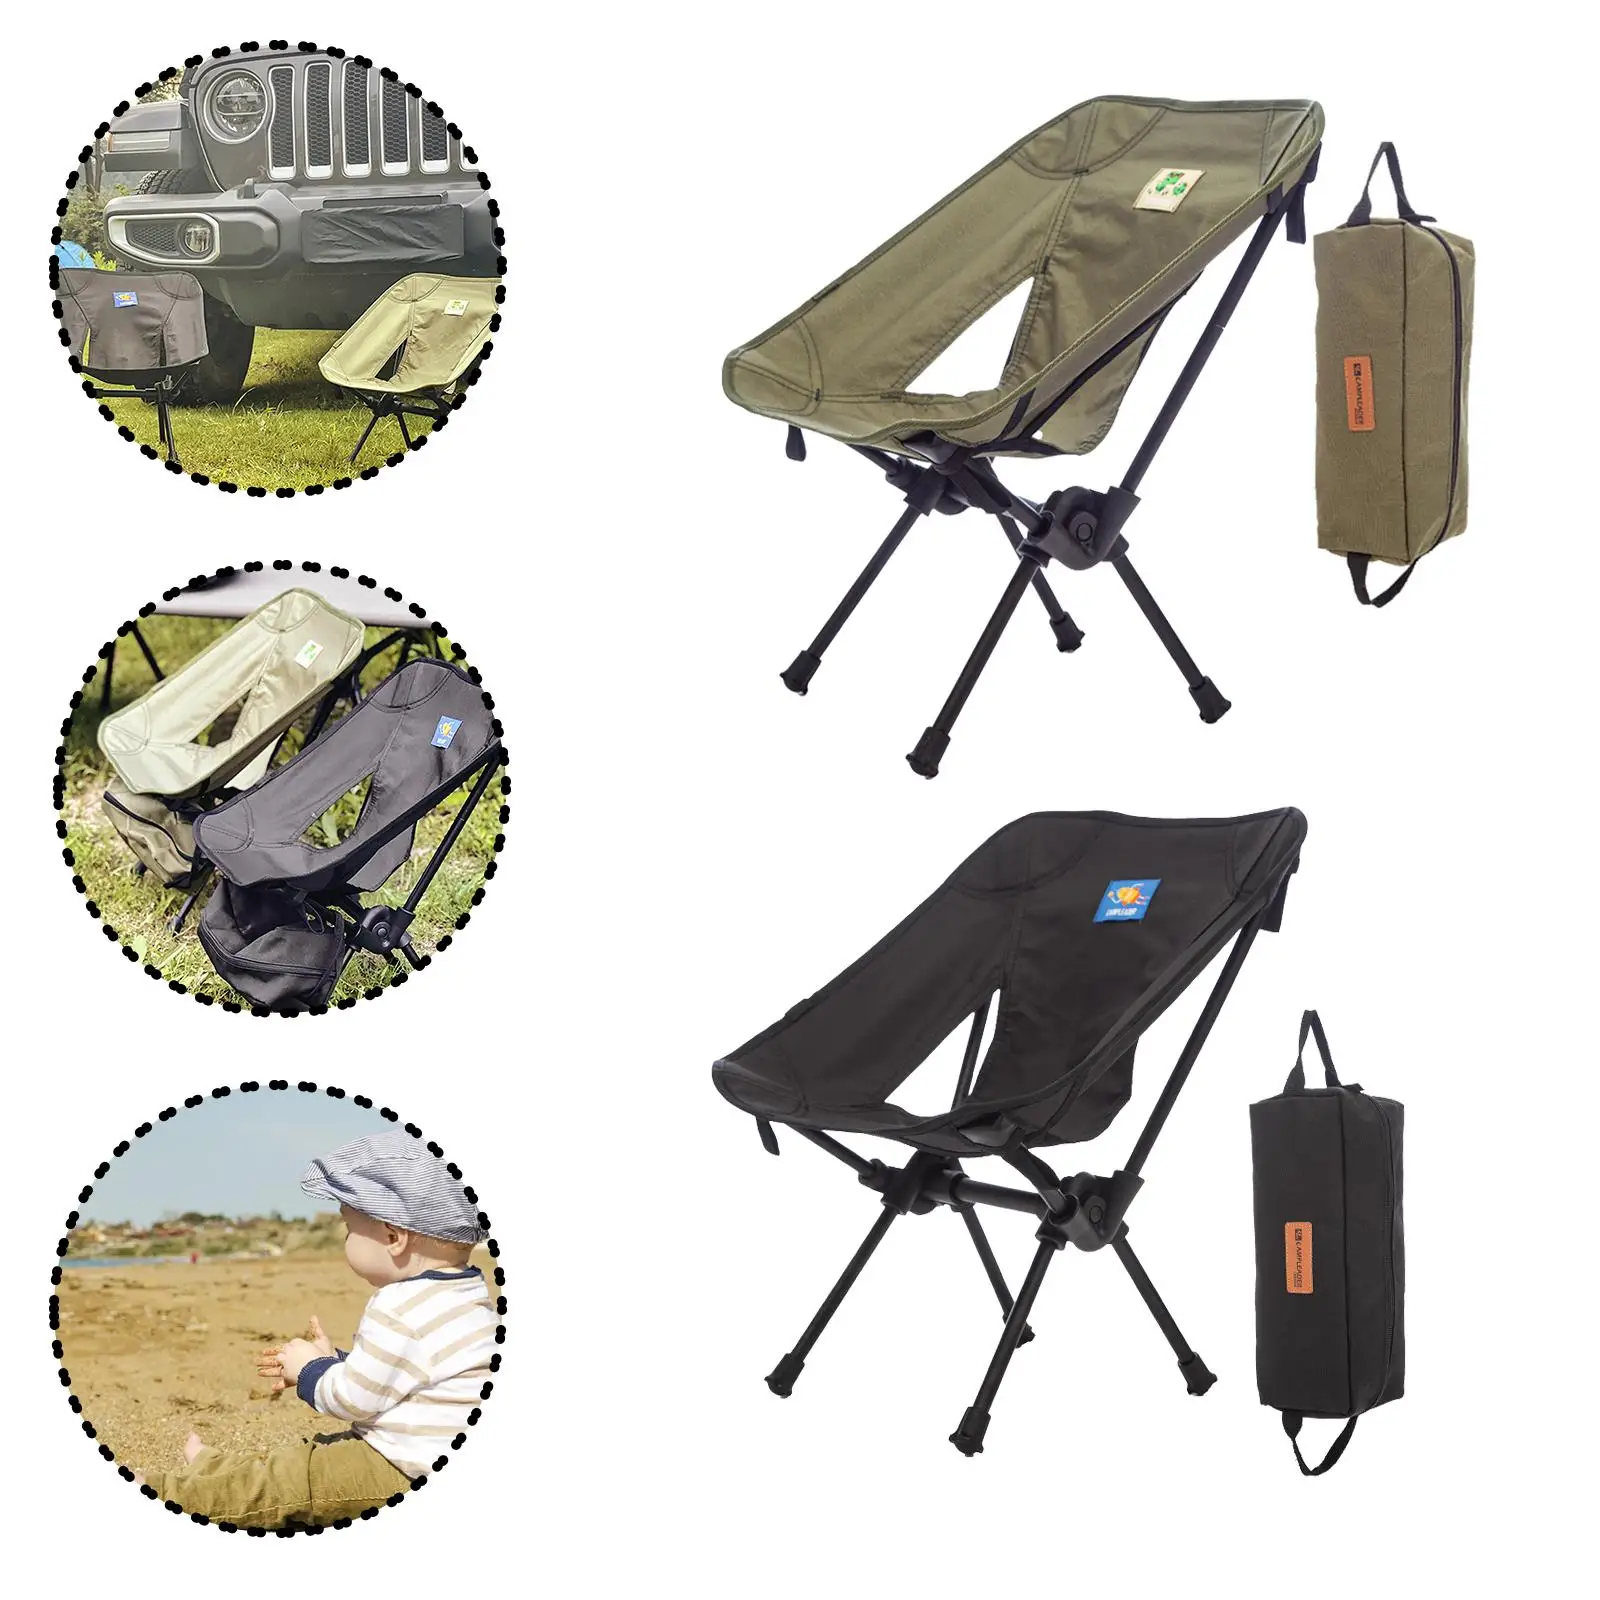 Aluminum Alloy Frame Camping Chair Stool Folding W/Storage Pouch Outdoor Children Seat for Travel Fishing Hiking Beach Barbecue